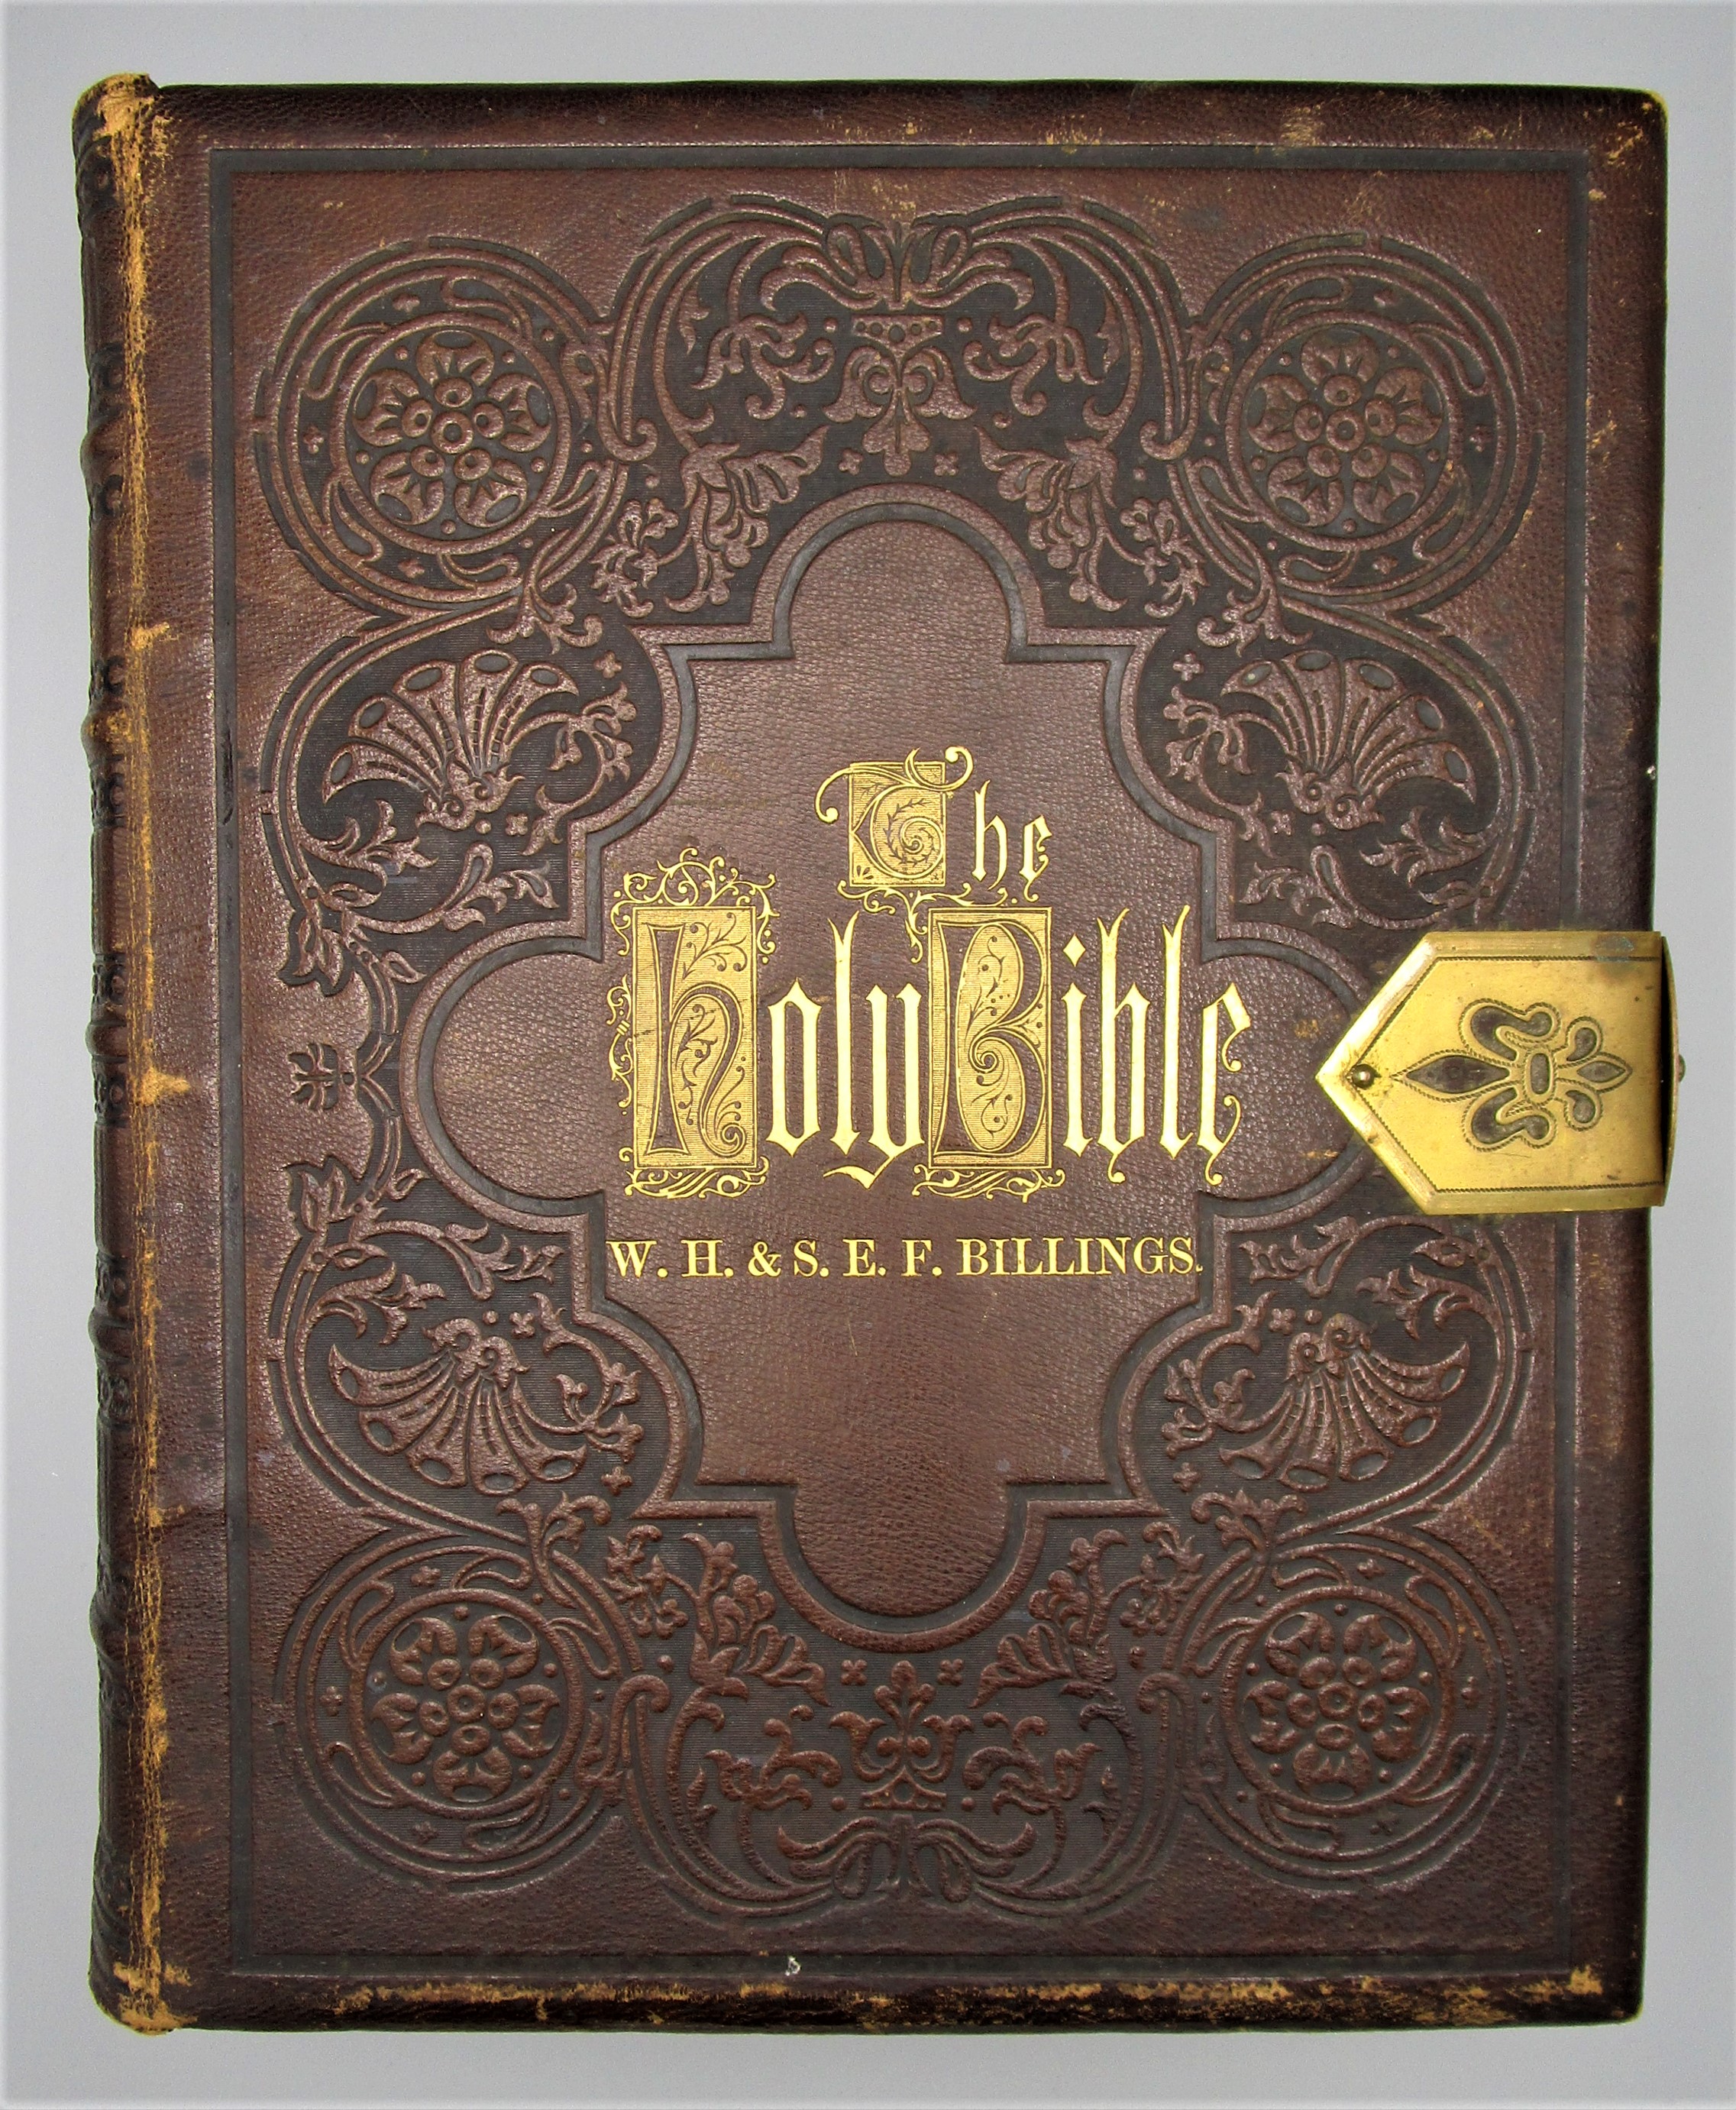 BILLINGS FAMILY BIBLE, by William W. Harding - 1871